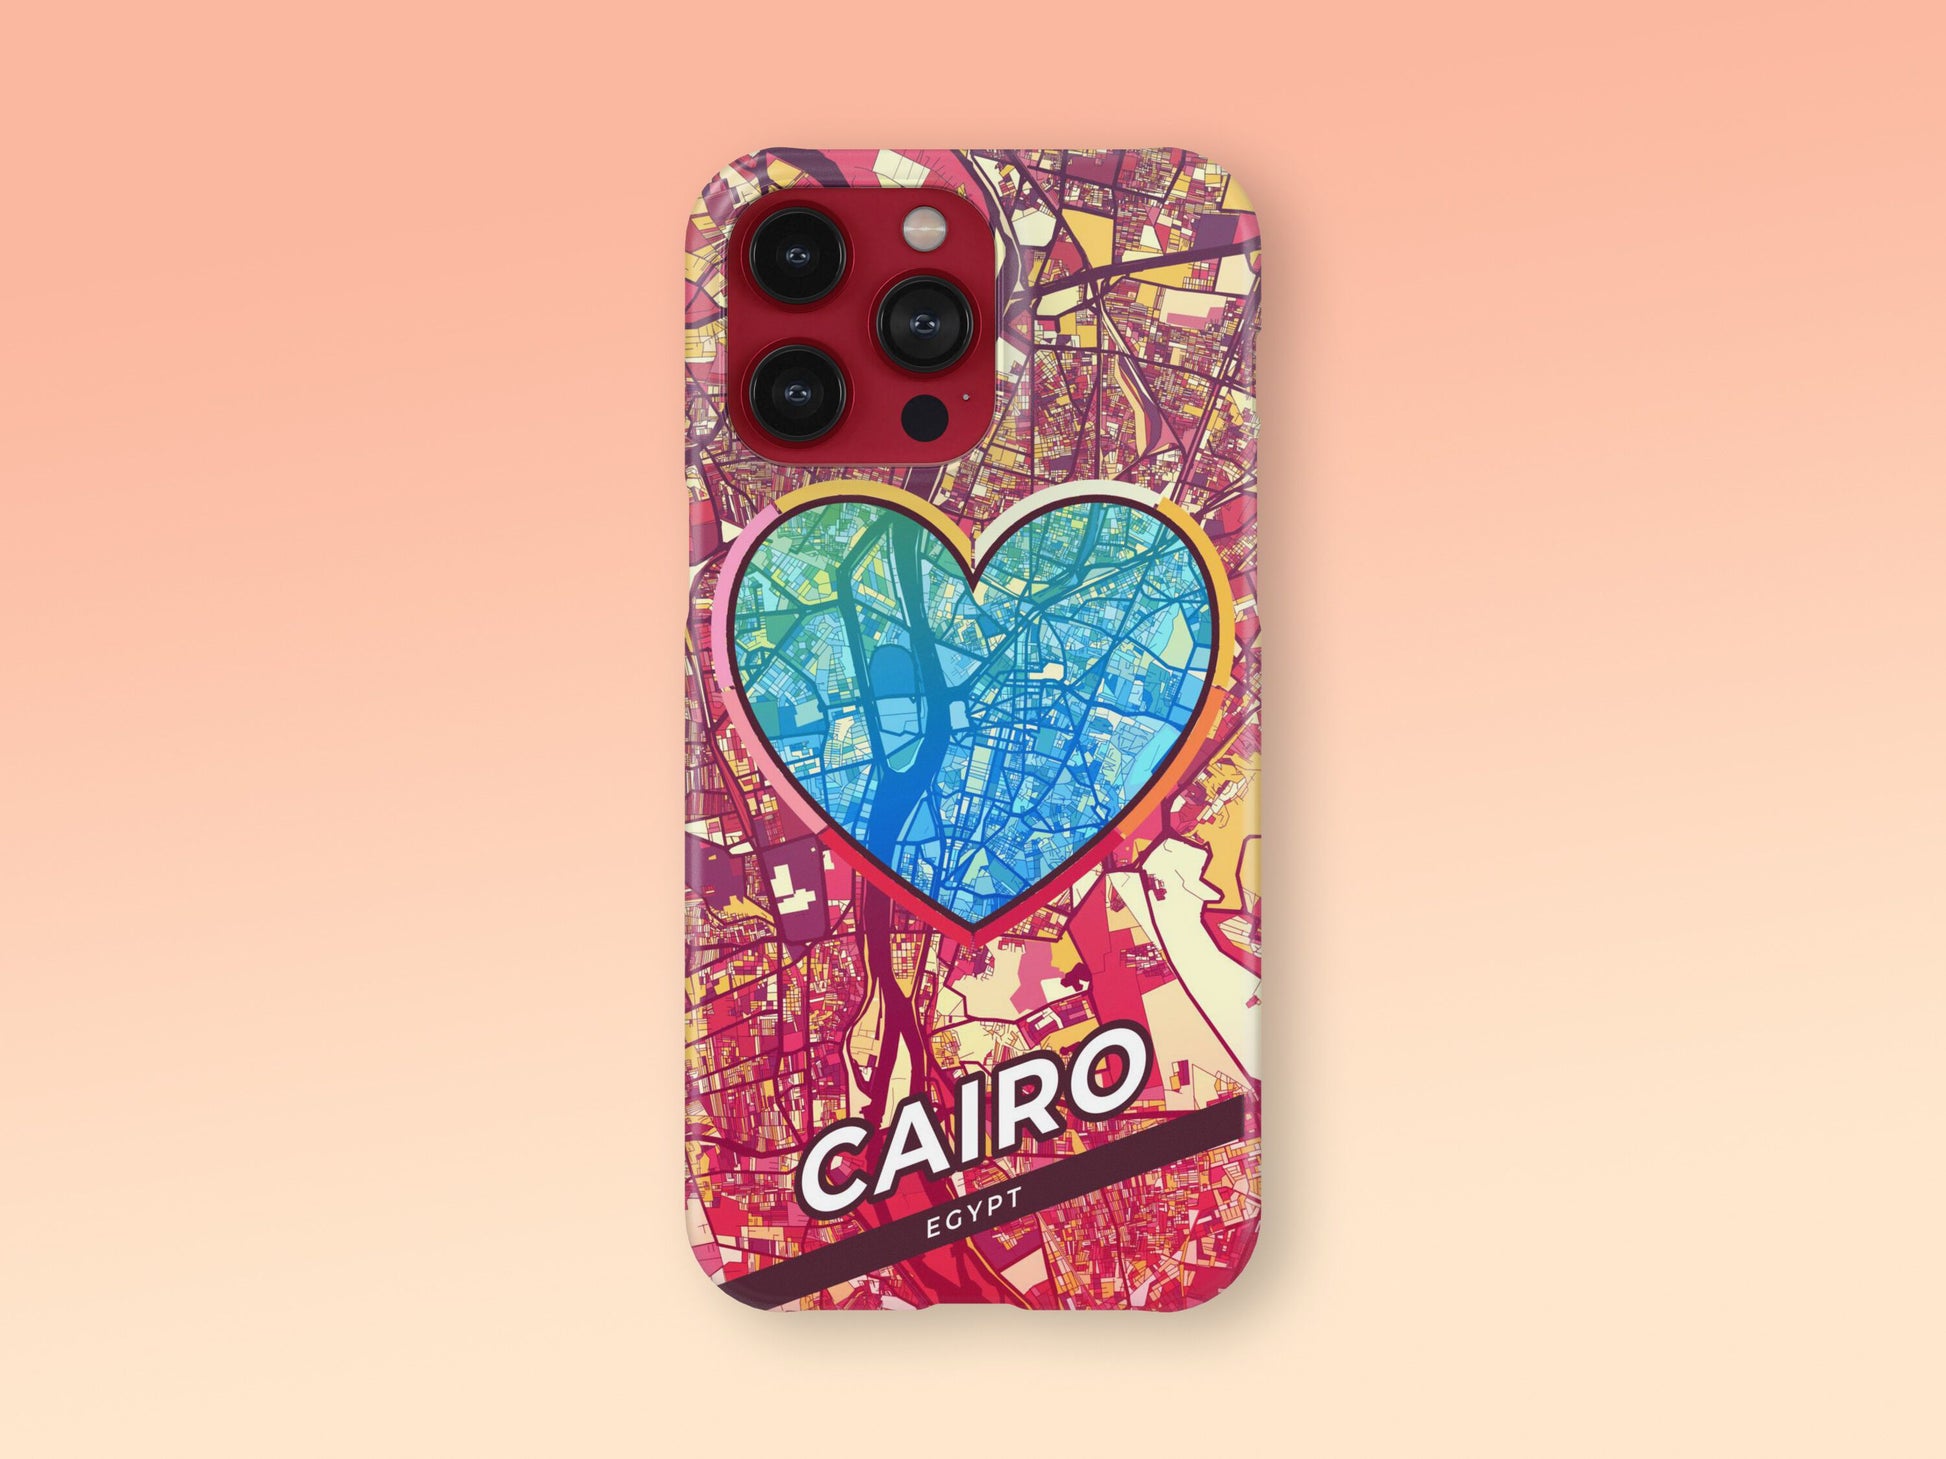 Cairo Egypt slim phone case with colorful icon. Birthday, wedding or housewarming gift. Couple match cases. 2